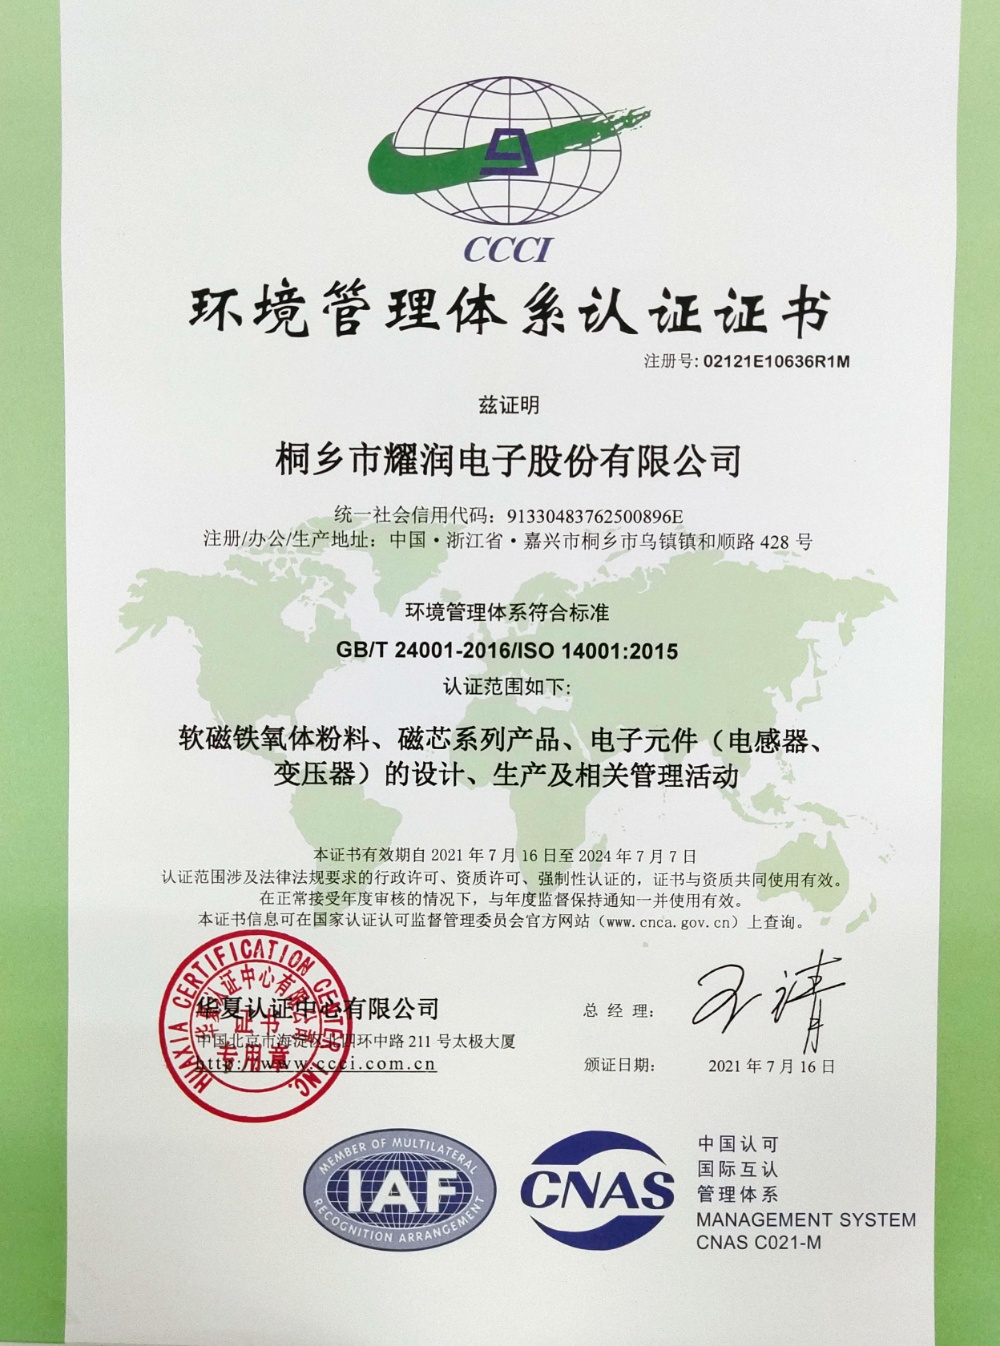 Certificate of environmental management system certification<br />GB/T 24001-2004/ISO 14001:2004